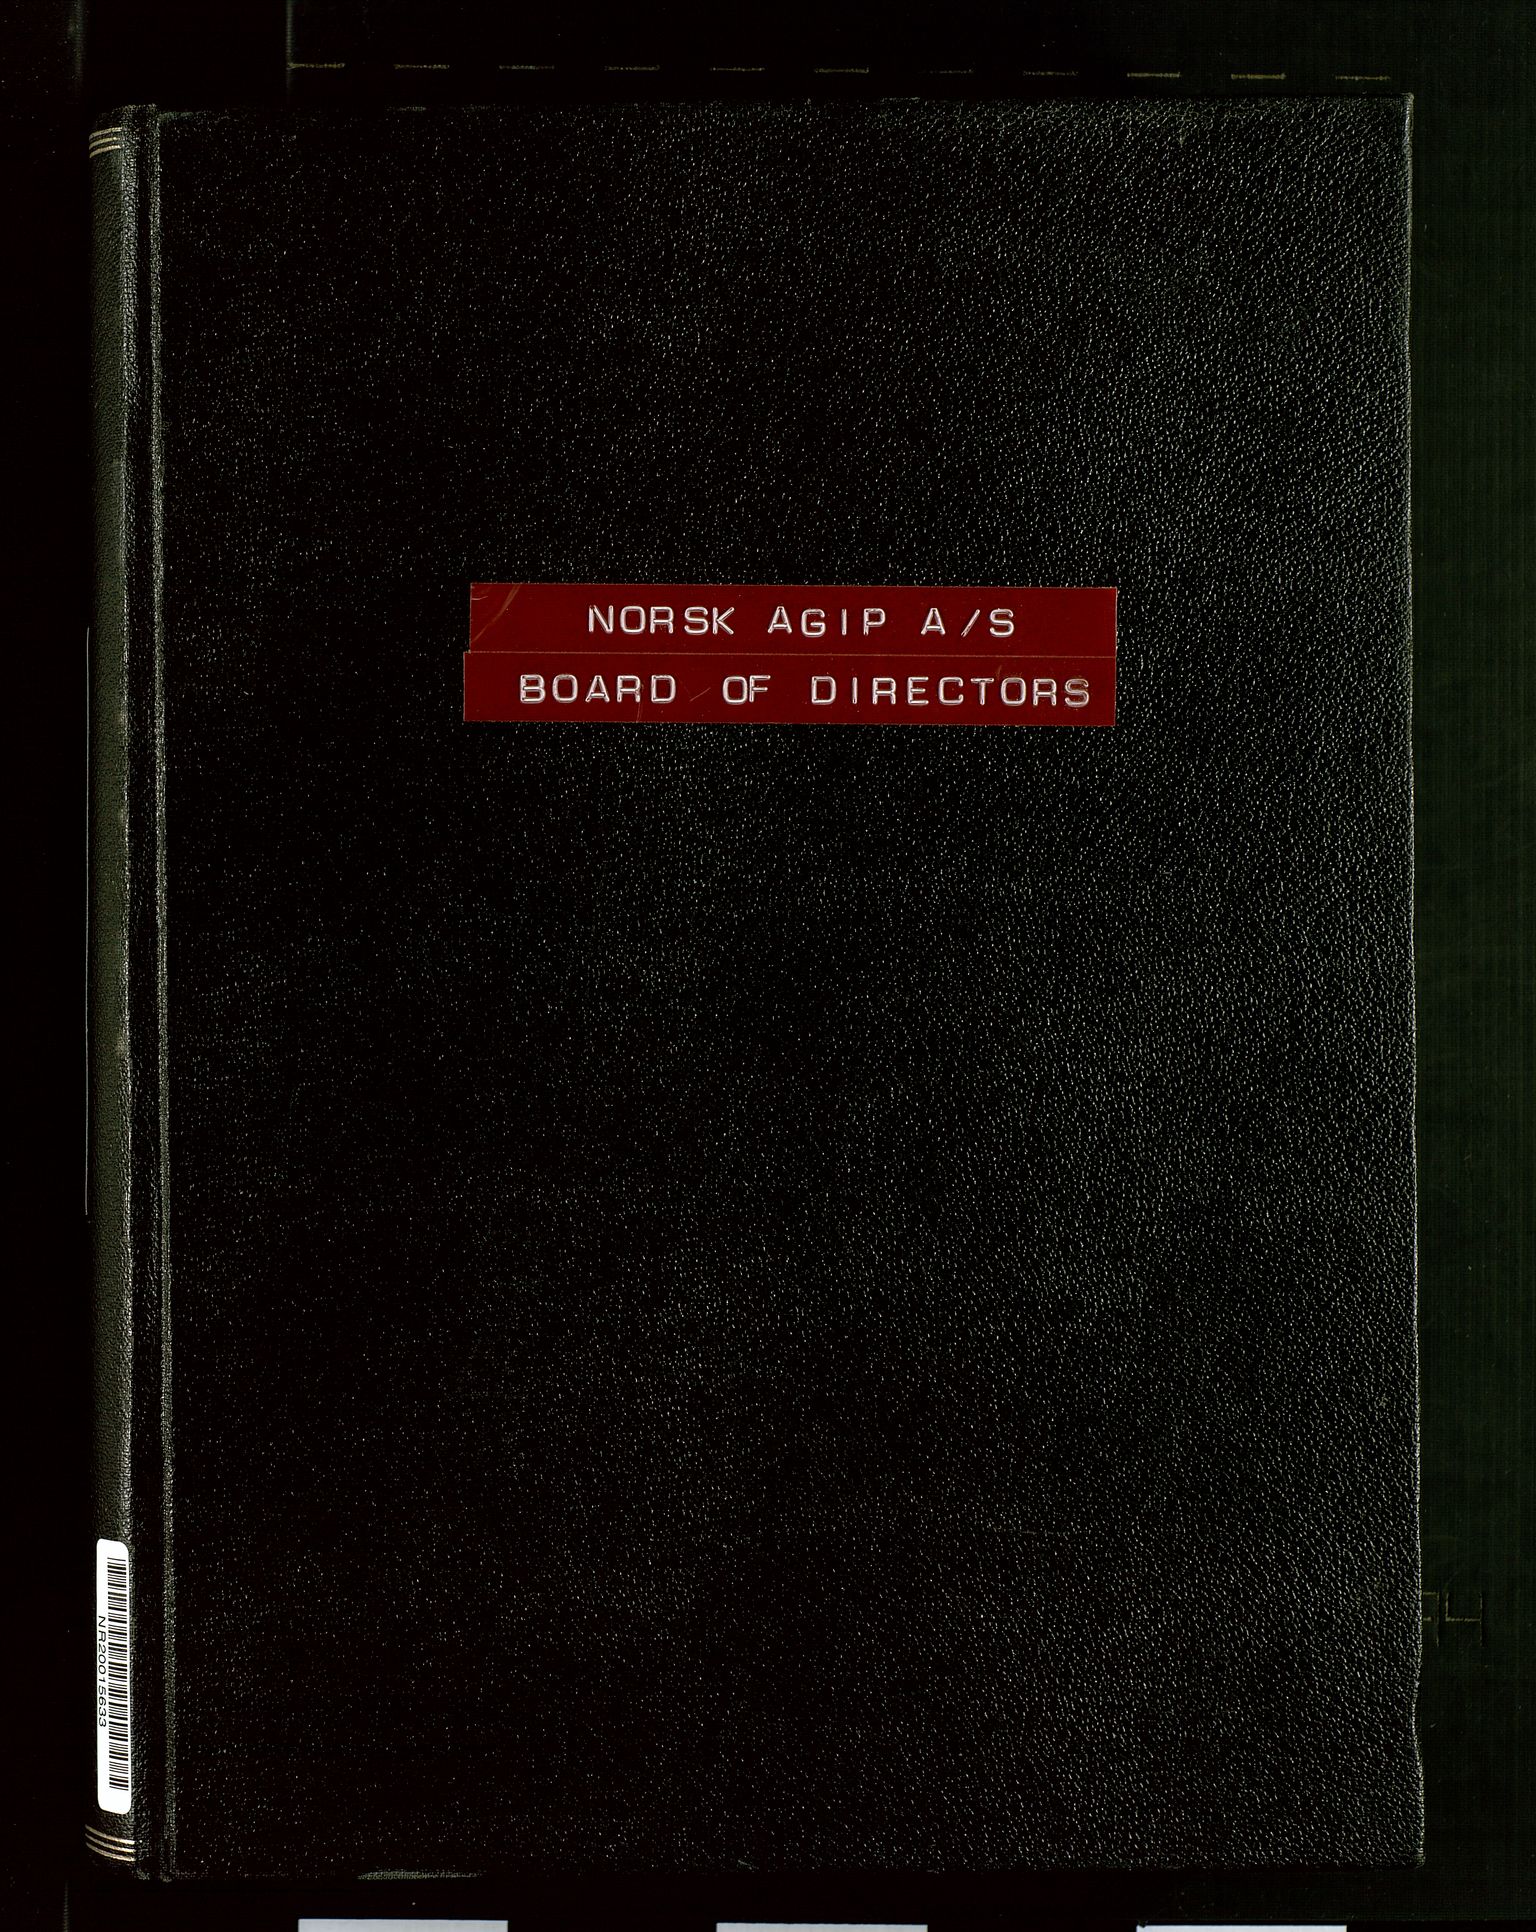 Pa 1583 - Norsk Agip AS, SAST/A-102138/A/Aa/L0003: Board of Directors meeting minutes, 1979-1983